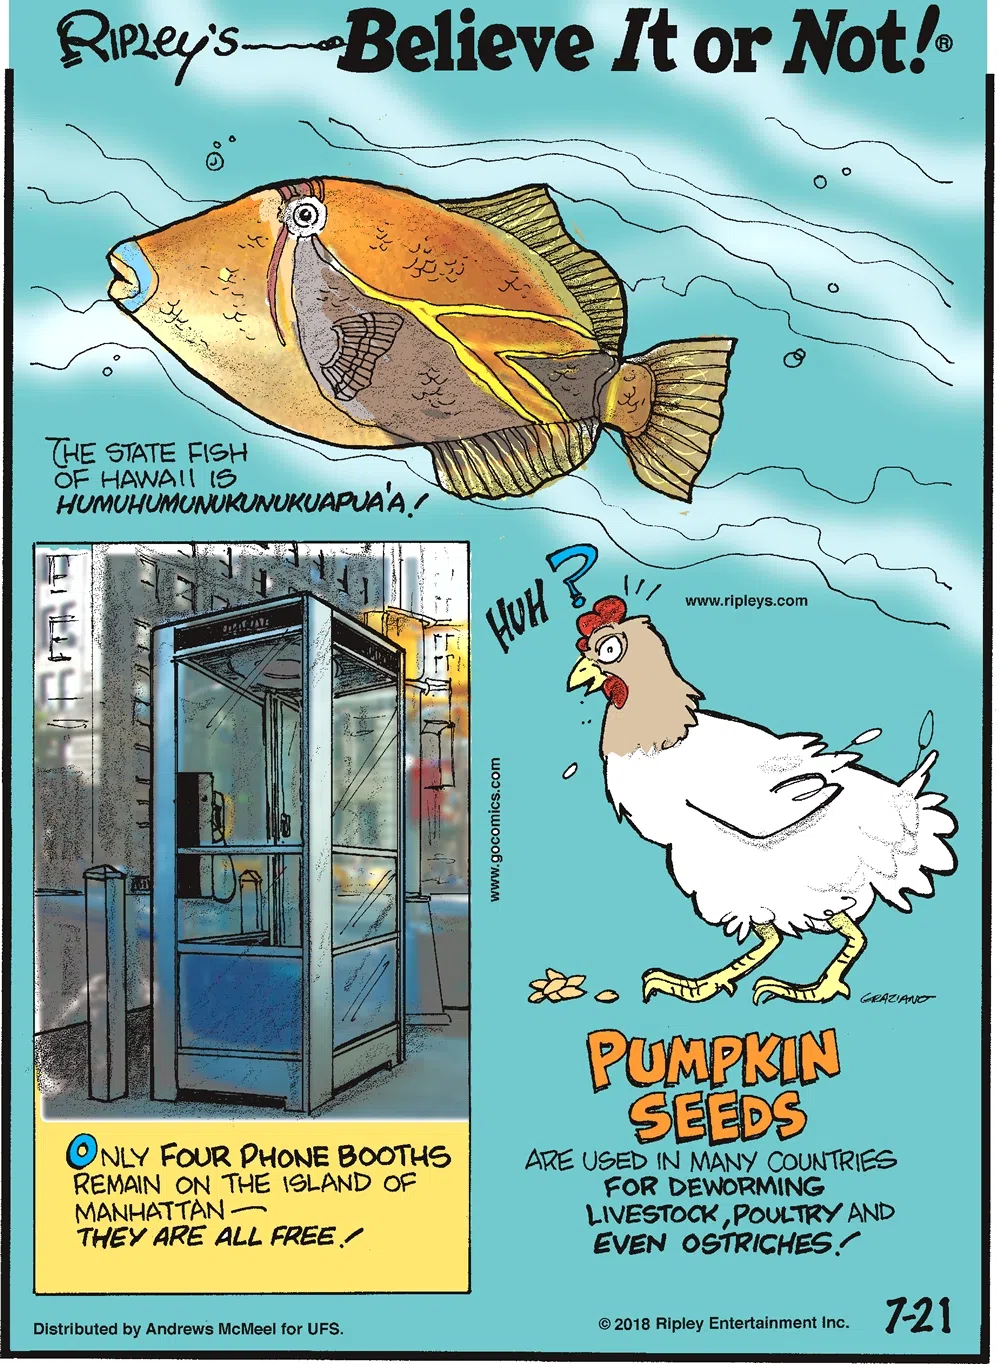 The state fish of Hawaii is humuhumunukunukuapua'a!-------------------- Only four phone booths remain on the island of Manhattan - they are all free!-------------------- Pumpkin seeds are used in many countries for deworming livestock, poultry and even ostriches!